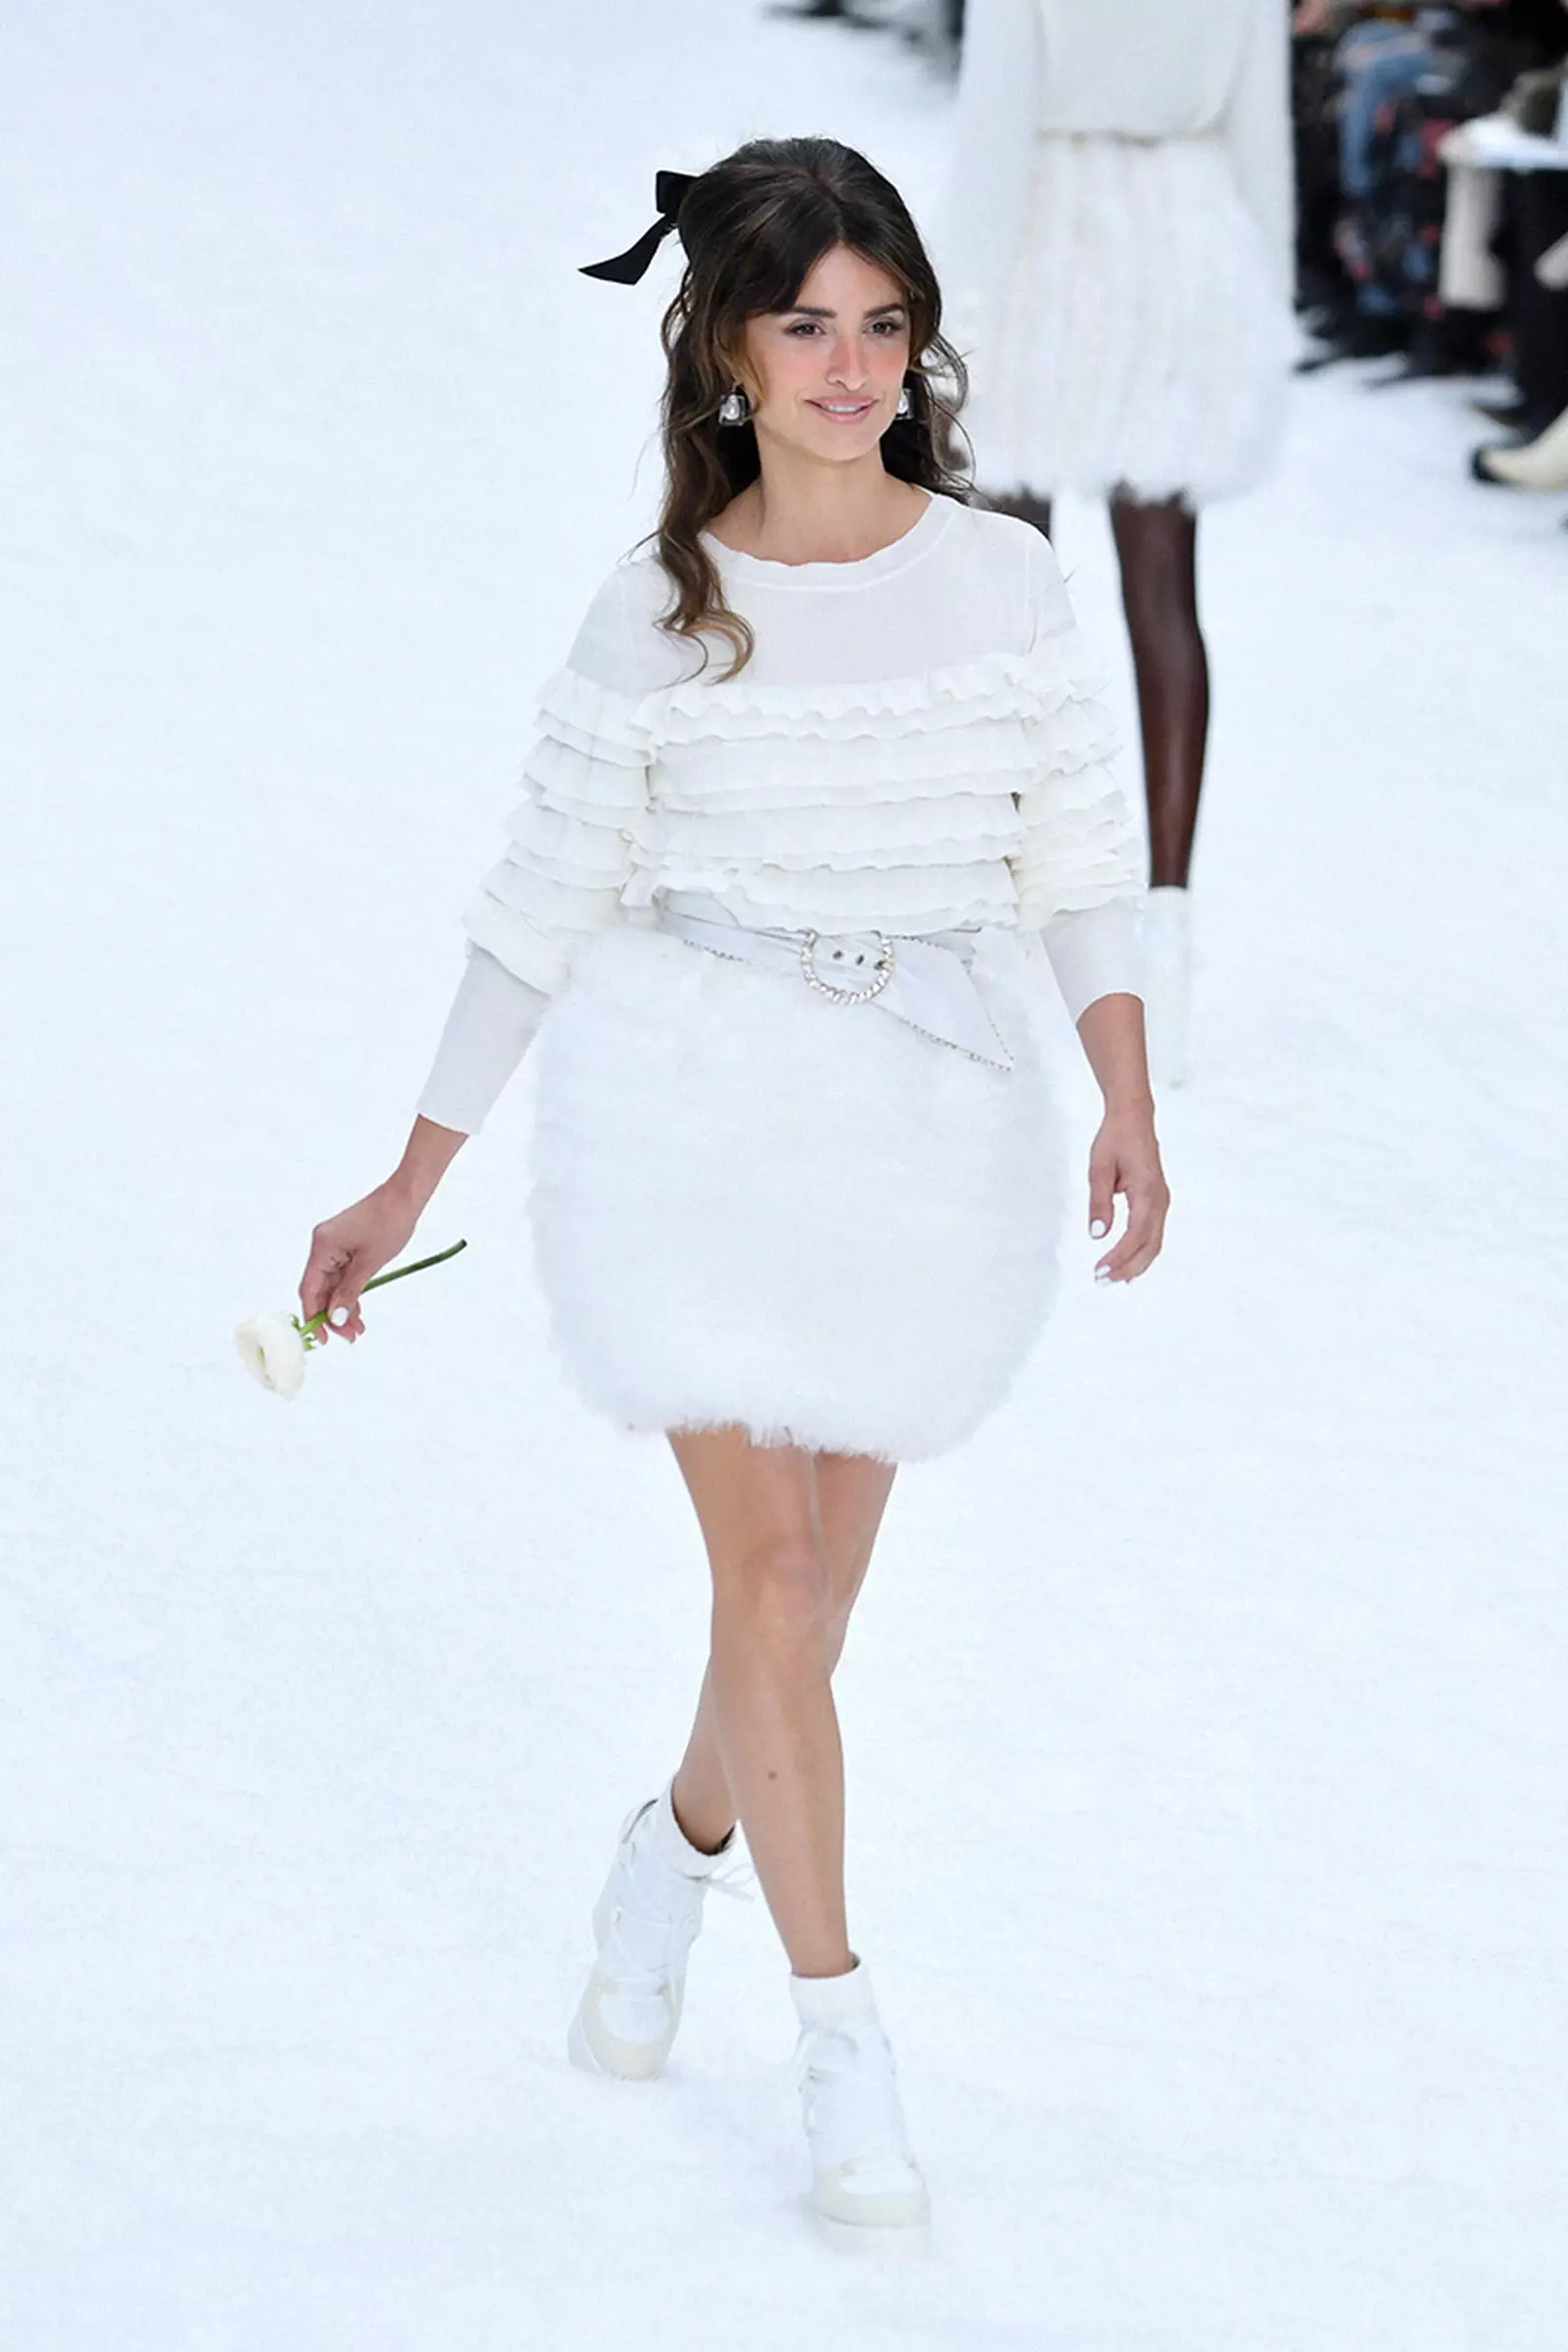 The best fashion shows set in the snow